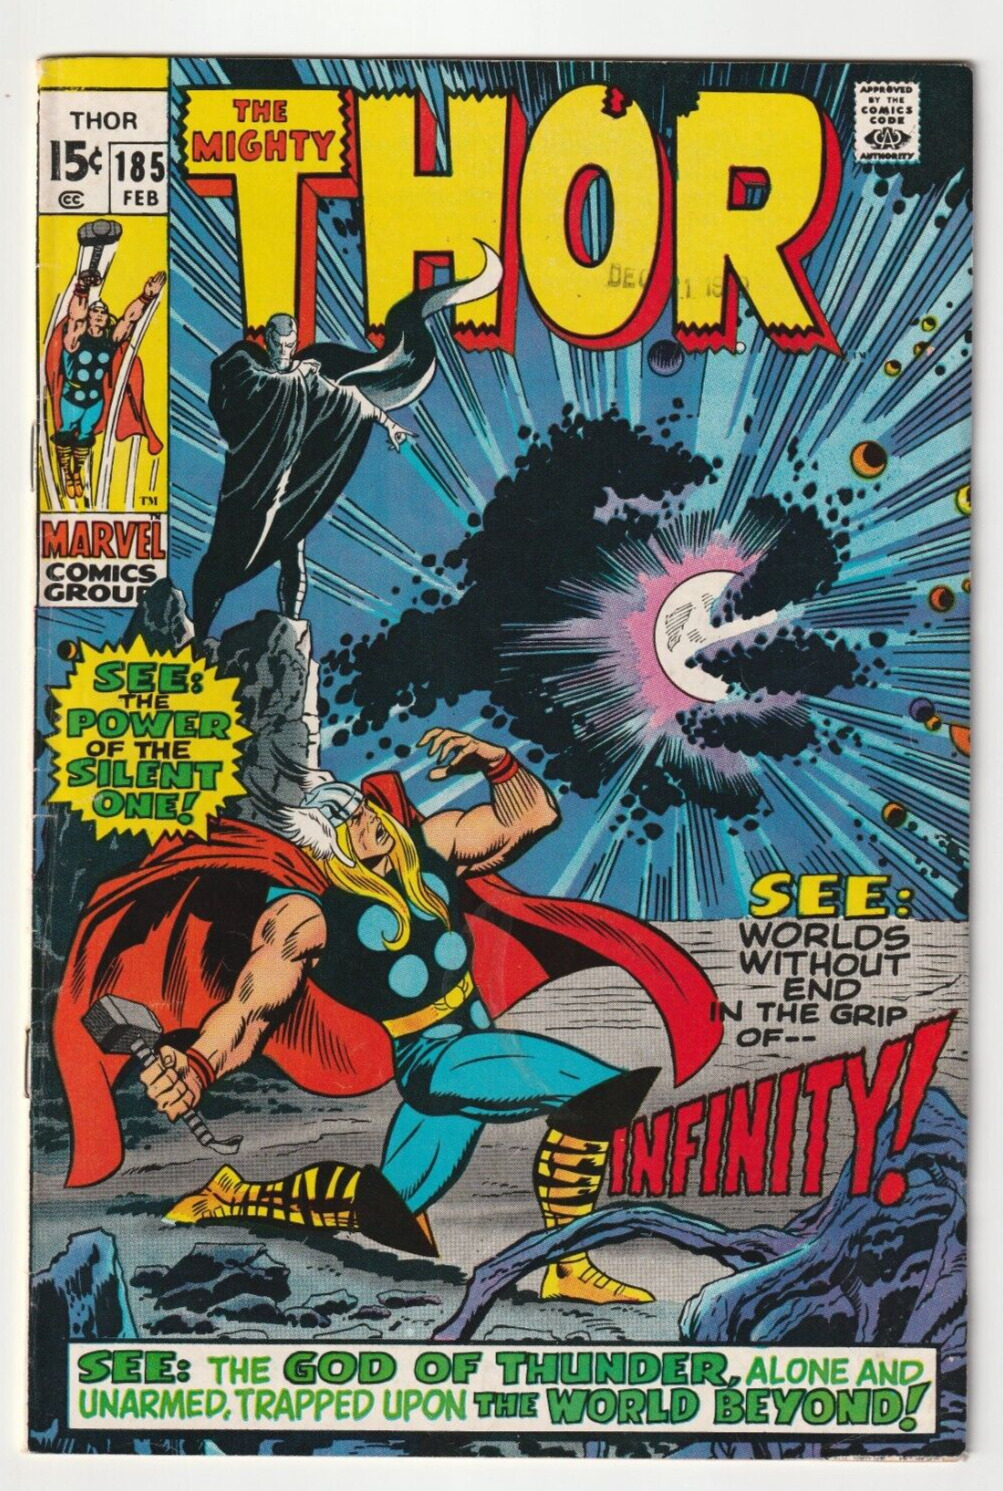 Thor #185 (Marvel Comics 1970) VF- Warriors Three Silent One Jack Kirby Cover